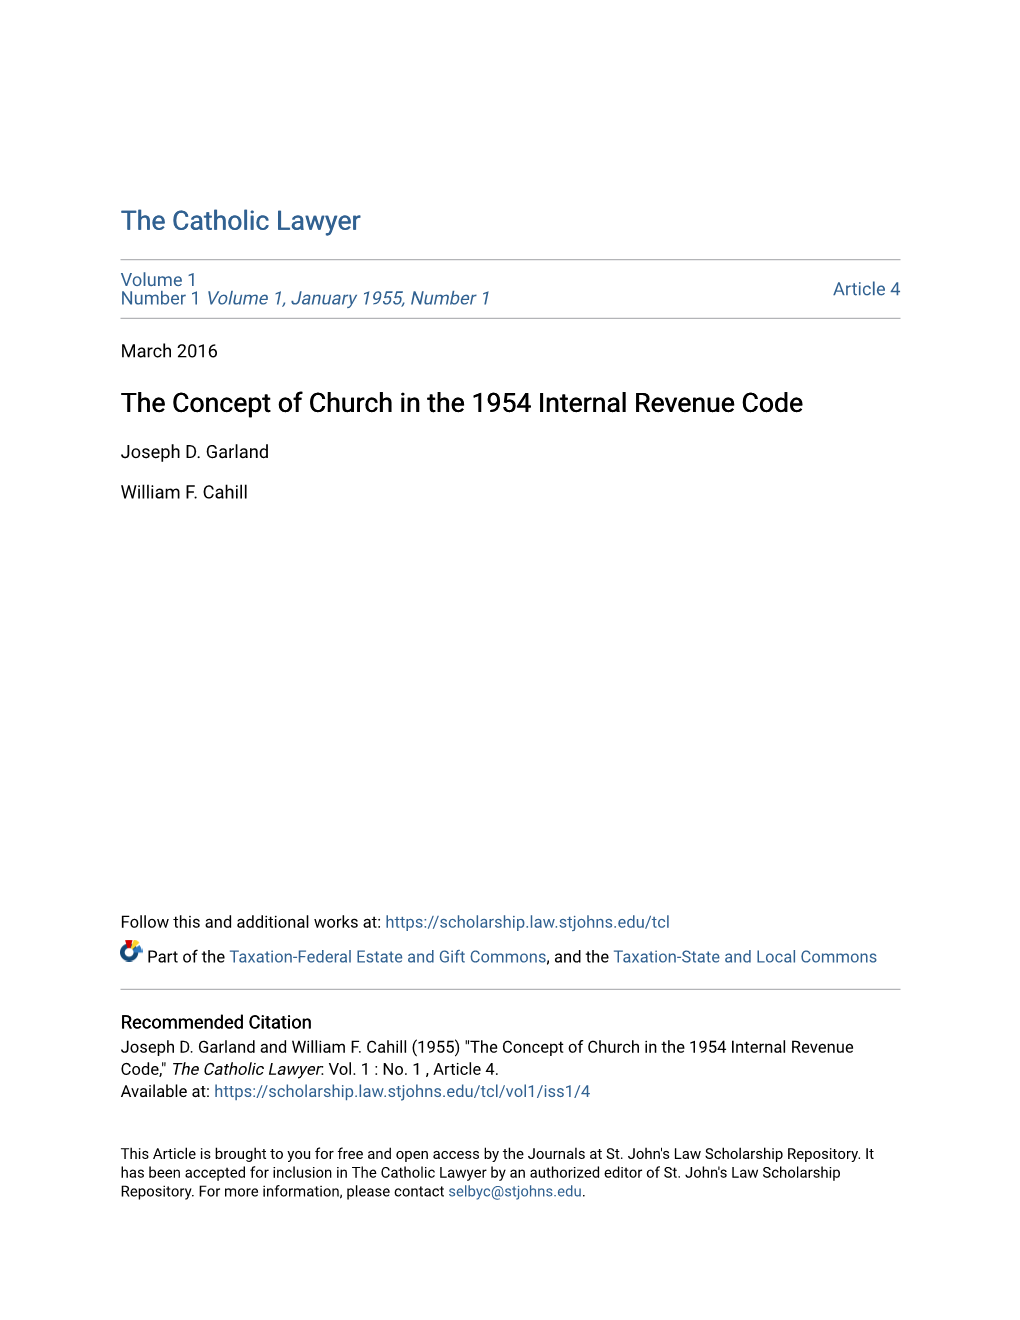 The Concept of Church in the 1954 Internal Revenue Code